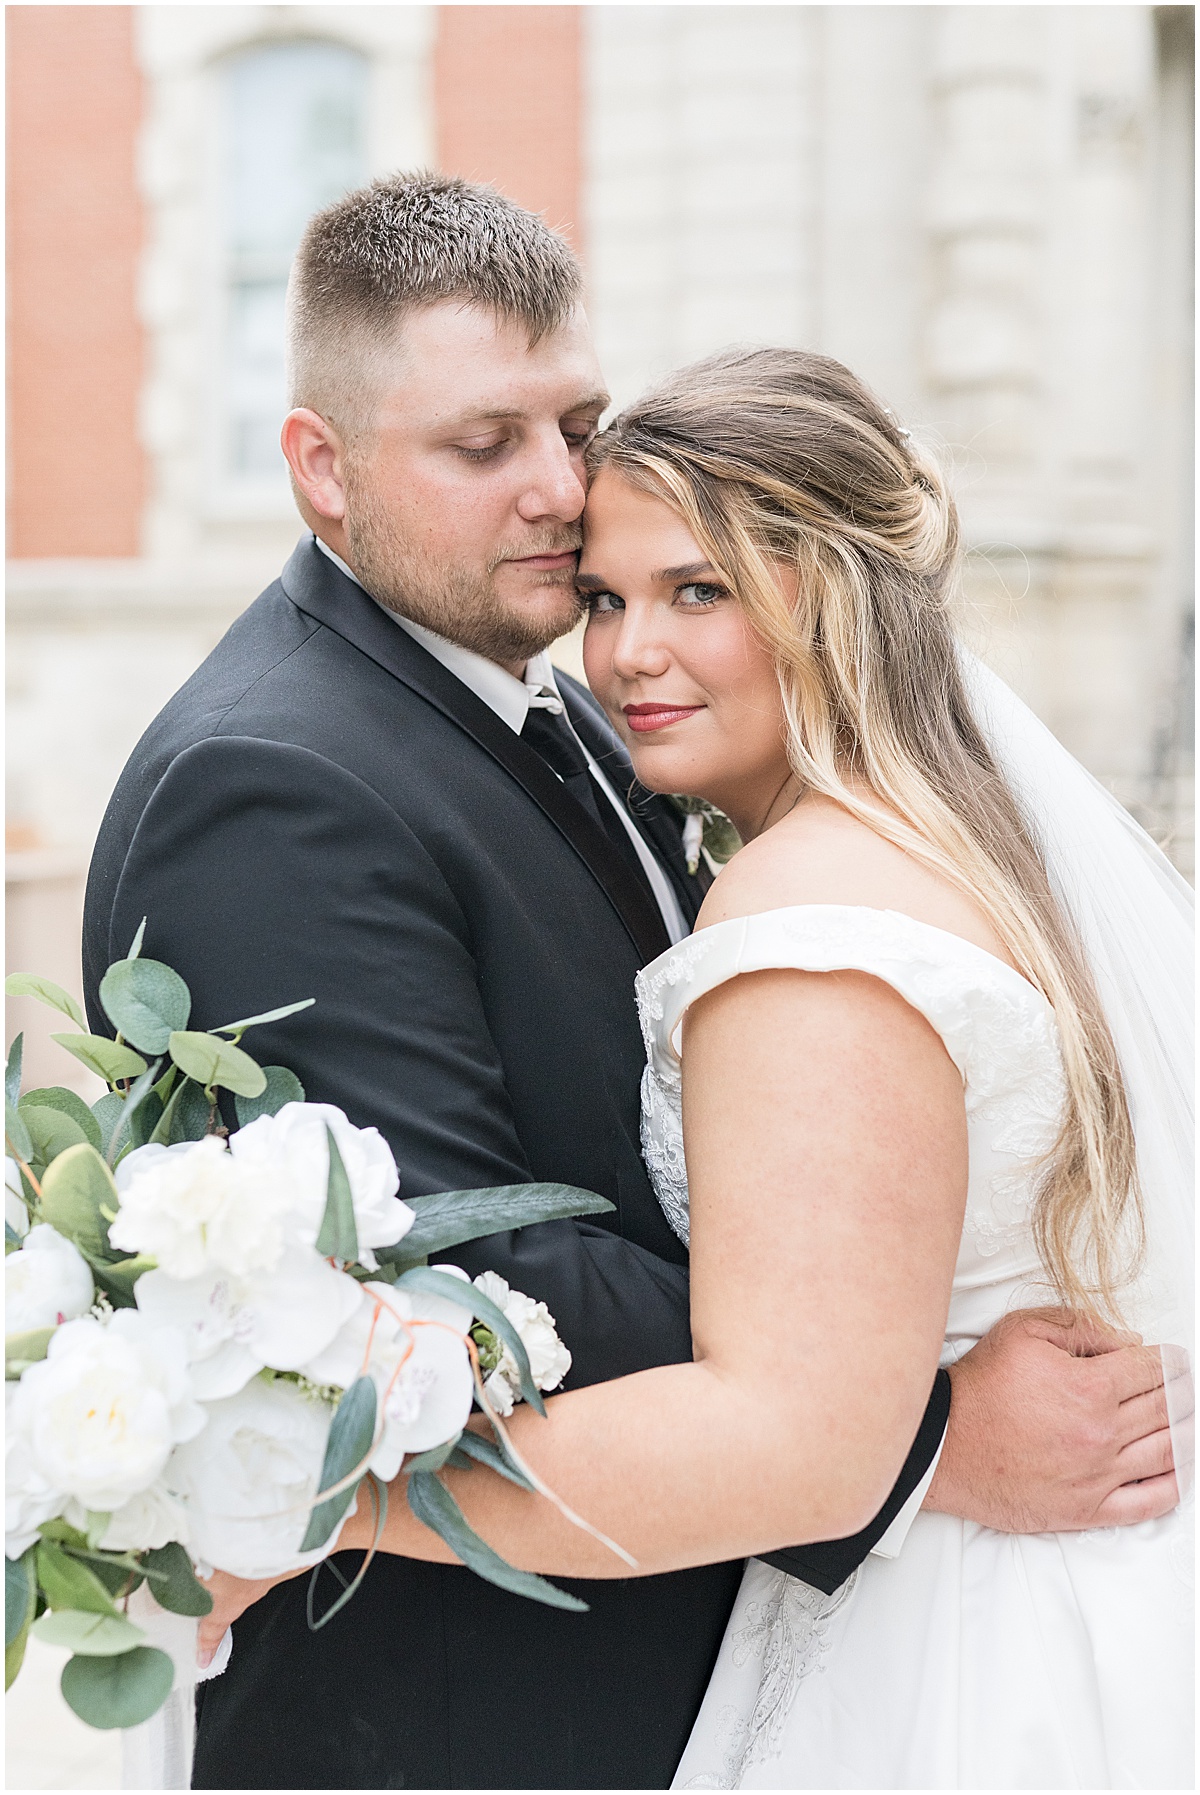 Newlyweds hug during wedding photos at Hamilton County Courthouse in downtown Noblesville, Indiana